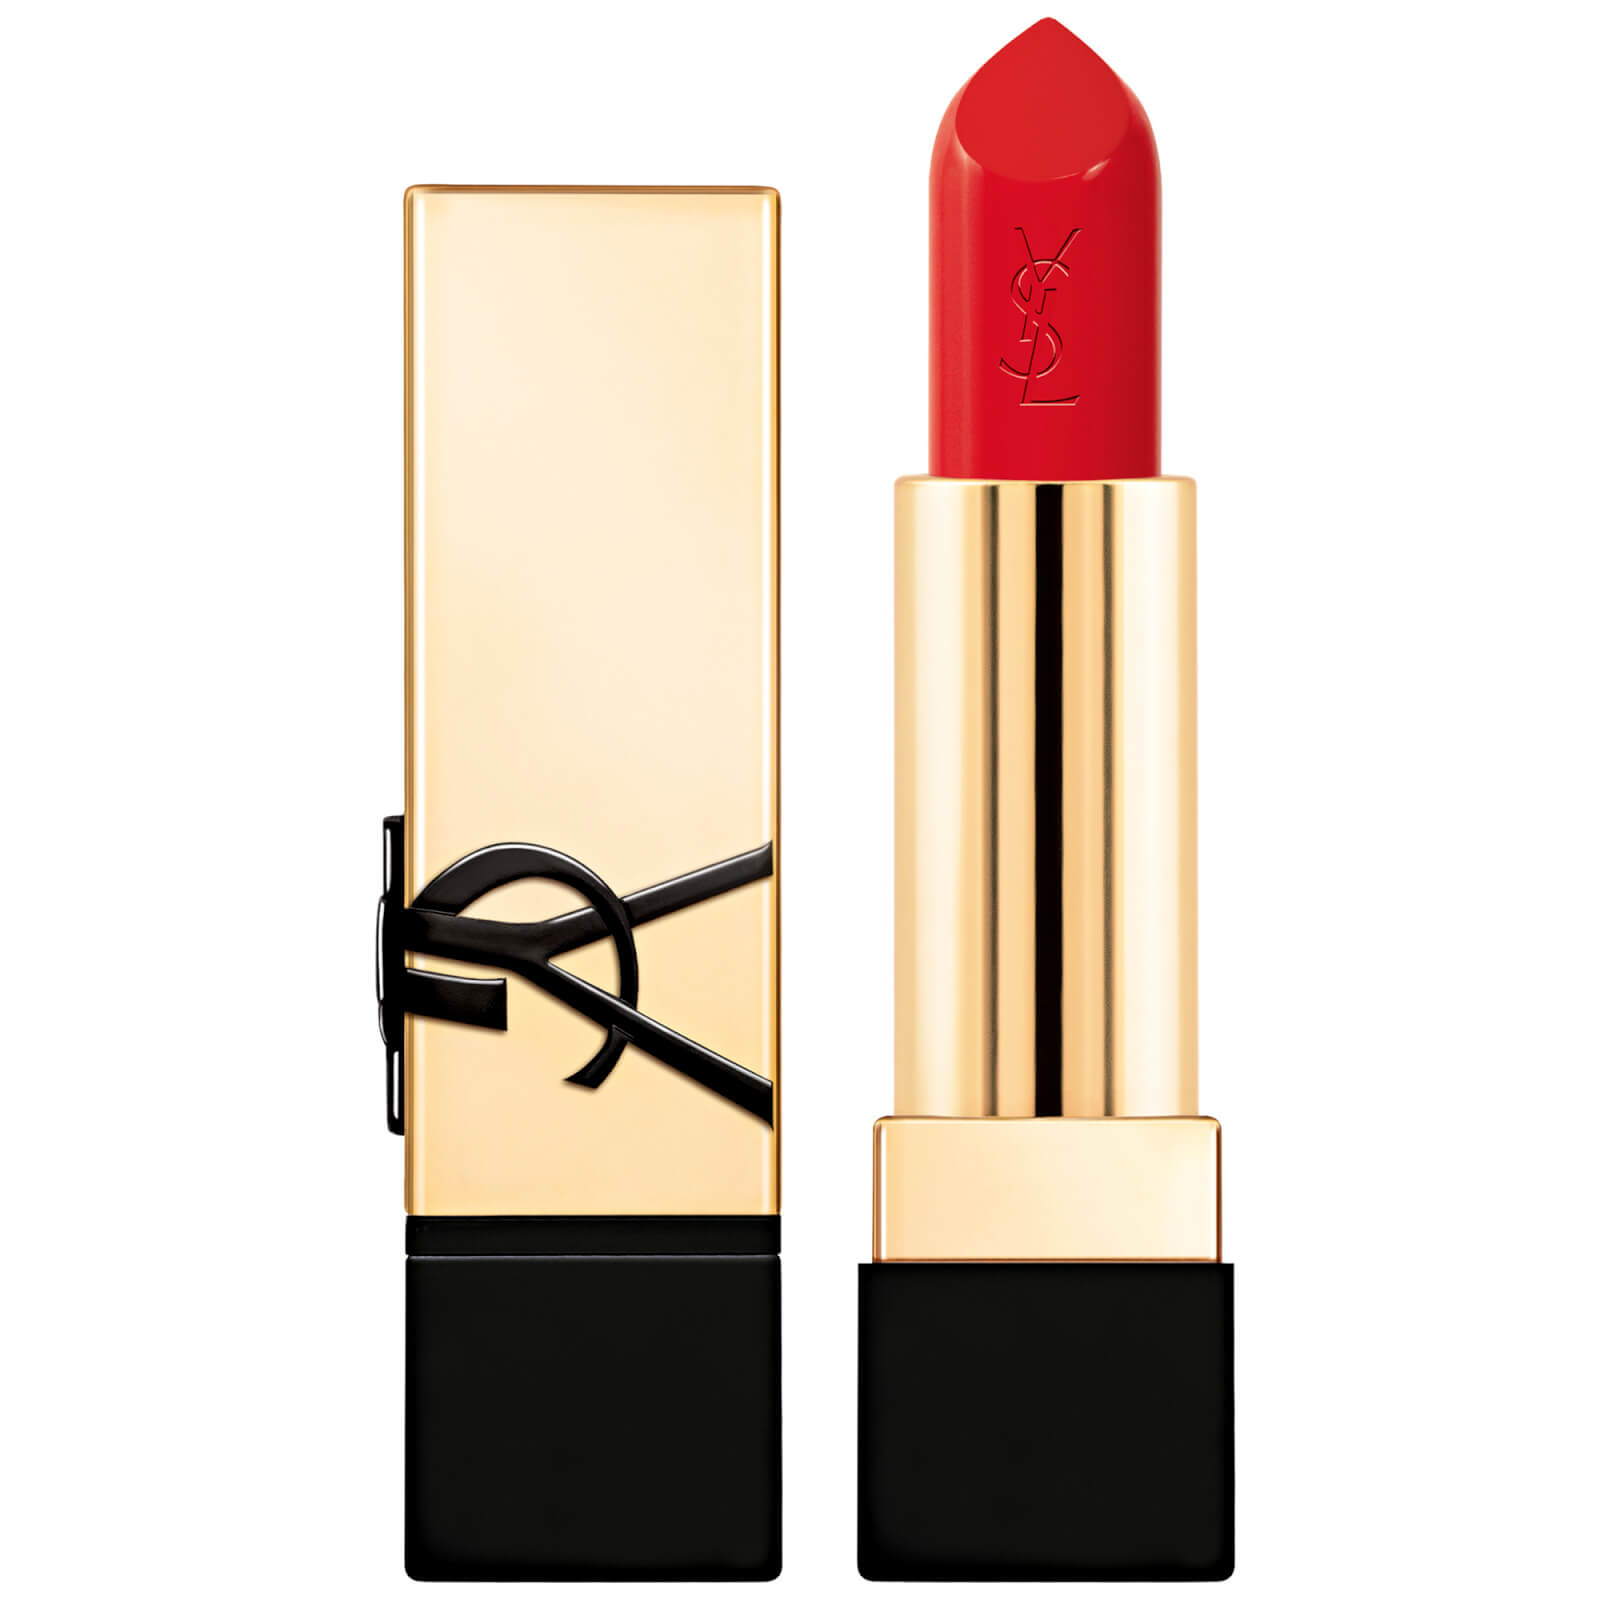 Ysl Yves Saint Laurent Rouge Pur Couture Renovation Lipstick 3g (various Shades) - R1